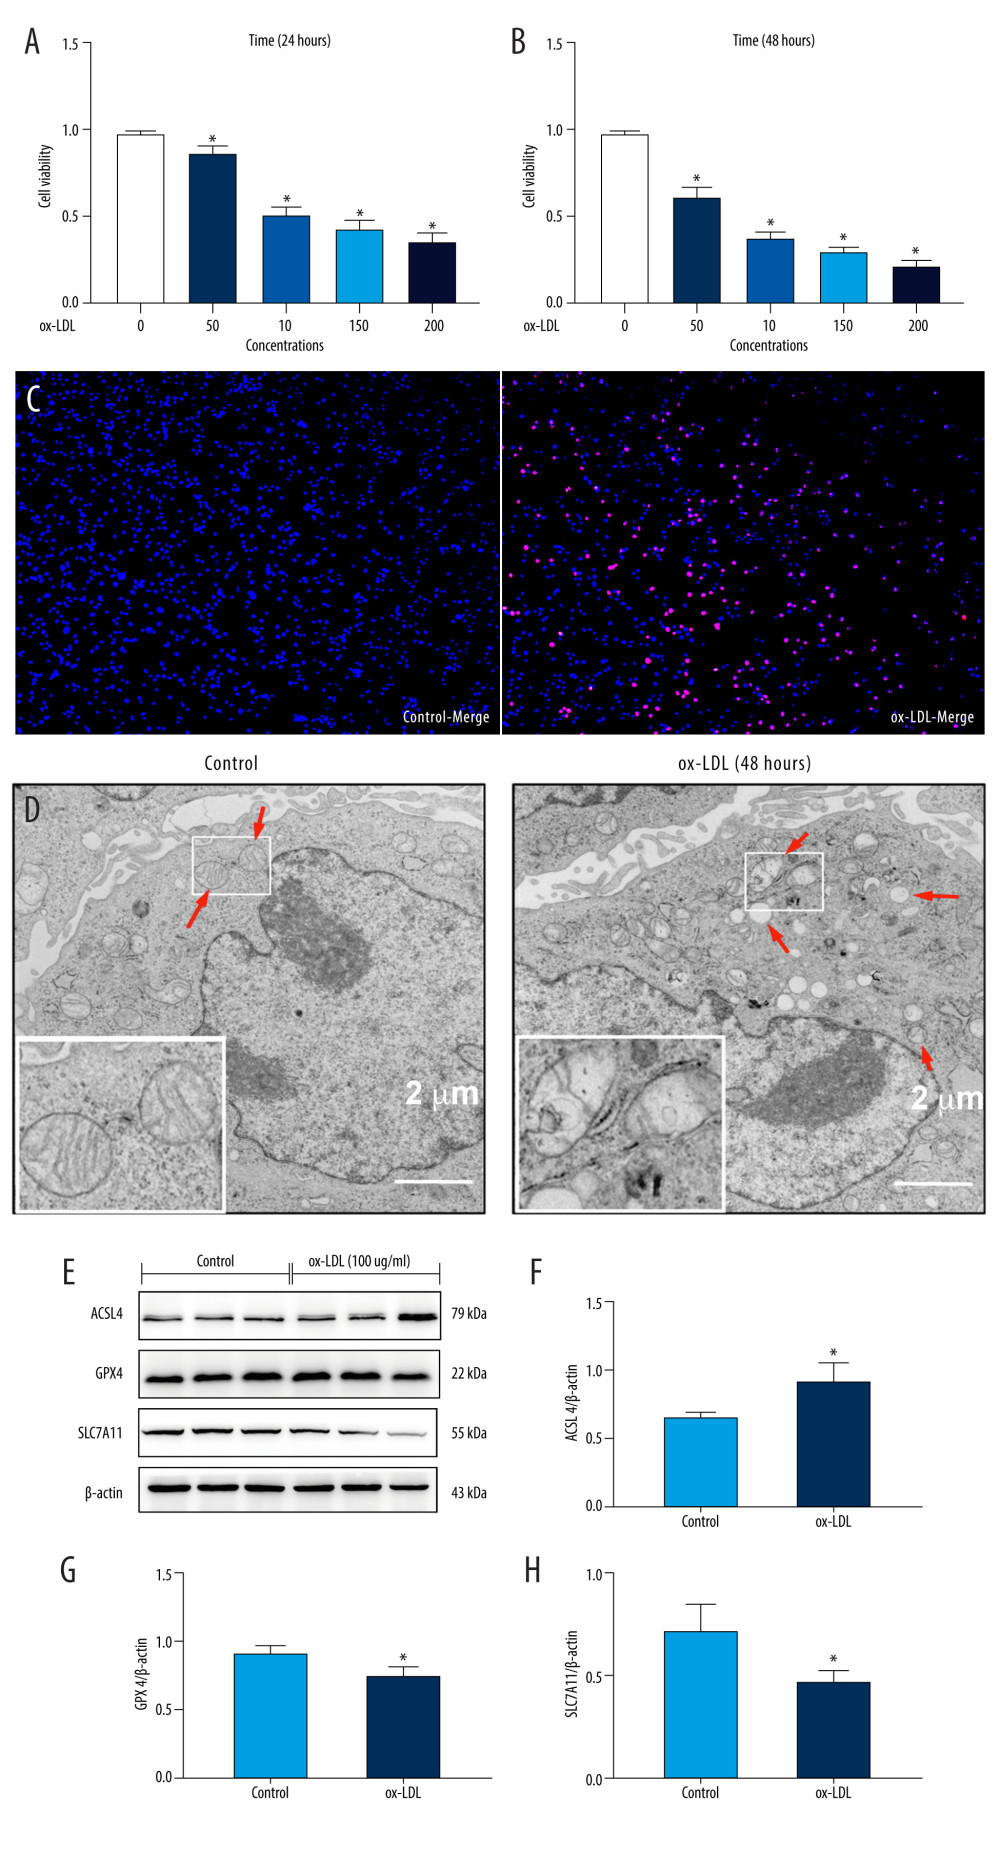 Oxidized low-density lipoprotein (ox-LDL) induced human umbilical vein endothelial cell (HUVEC) ferroptosis in a dose-dependent manner. (A, B) HUVEC metabolic activity was analyzed using Cell Counting Kit-8 (CCK-8) assay following treatment with ox-LDL (0–200 μg/mL; n=4). Statistical power=0.929356, effect size(r)=0.830181. (C) Hoechst/propidium iodide (PI) staining images were captured using fluorescence microscopy (Hoechst in blue, and PI in red; scale bars=100 μm). (D) The microscopic morphology of HUVECs under transmission electron microscope. (E) acyl-CoA synthetase long-chain family member 4 (ACSL4), glutathione peroxidase 4 (GPX4), and recombinant solute carrier family 7, member 11 (SLC7A11) protein expression levels were measured using Western blot analysis. (F–H) The results were normalized to controls, and histograms represent the relative intensities of ACSL4, GPX4, and SLC7A11. The data are expressed as the mean±SD (n=3–4 per group). Statistical power=0.913357, effect size(r)=0.804728. * P<0.05 vs the control group. # P<0.05 vs the ox-LDL group. Fluorescent images were evaluated using Olympus fluorescence microscopy with cellSens Dimension software (Version 1.3 rev, Olympus, Tokyo, Japan), and the positive cells was measured by Image Pro Plus 6.0 (Media Cybernetics, Rockville, MD, USA). Transmission electron microscopy (Talos L120C G2, FEI, Czech) was adopted to observe the morphology of HUVECs. The relative protein levels were quantified by Image J software (NIH, Bethesda, MD, USA). GraphPad Prism 9.0 software (La Jolla, USA) was used to analyze the data.